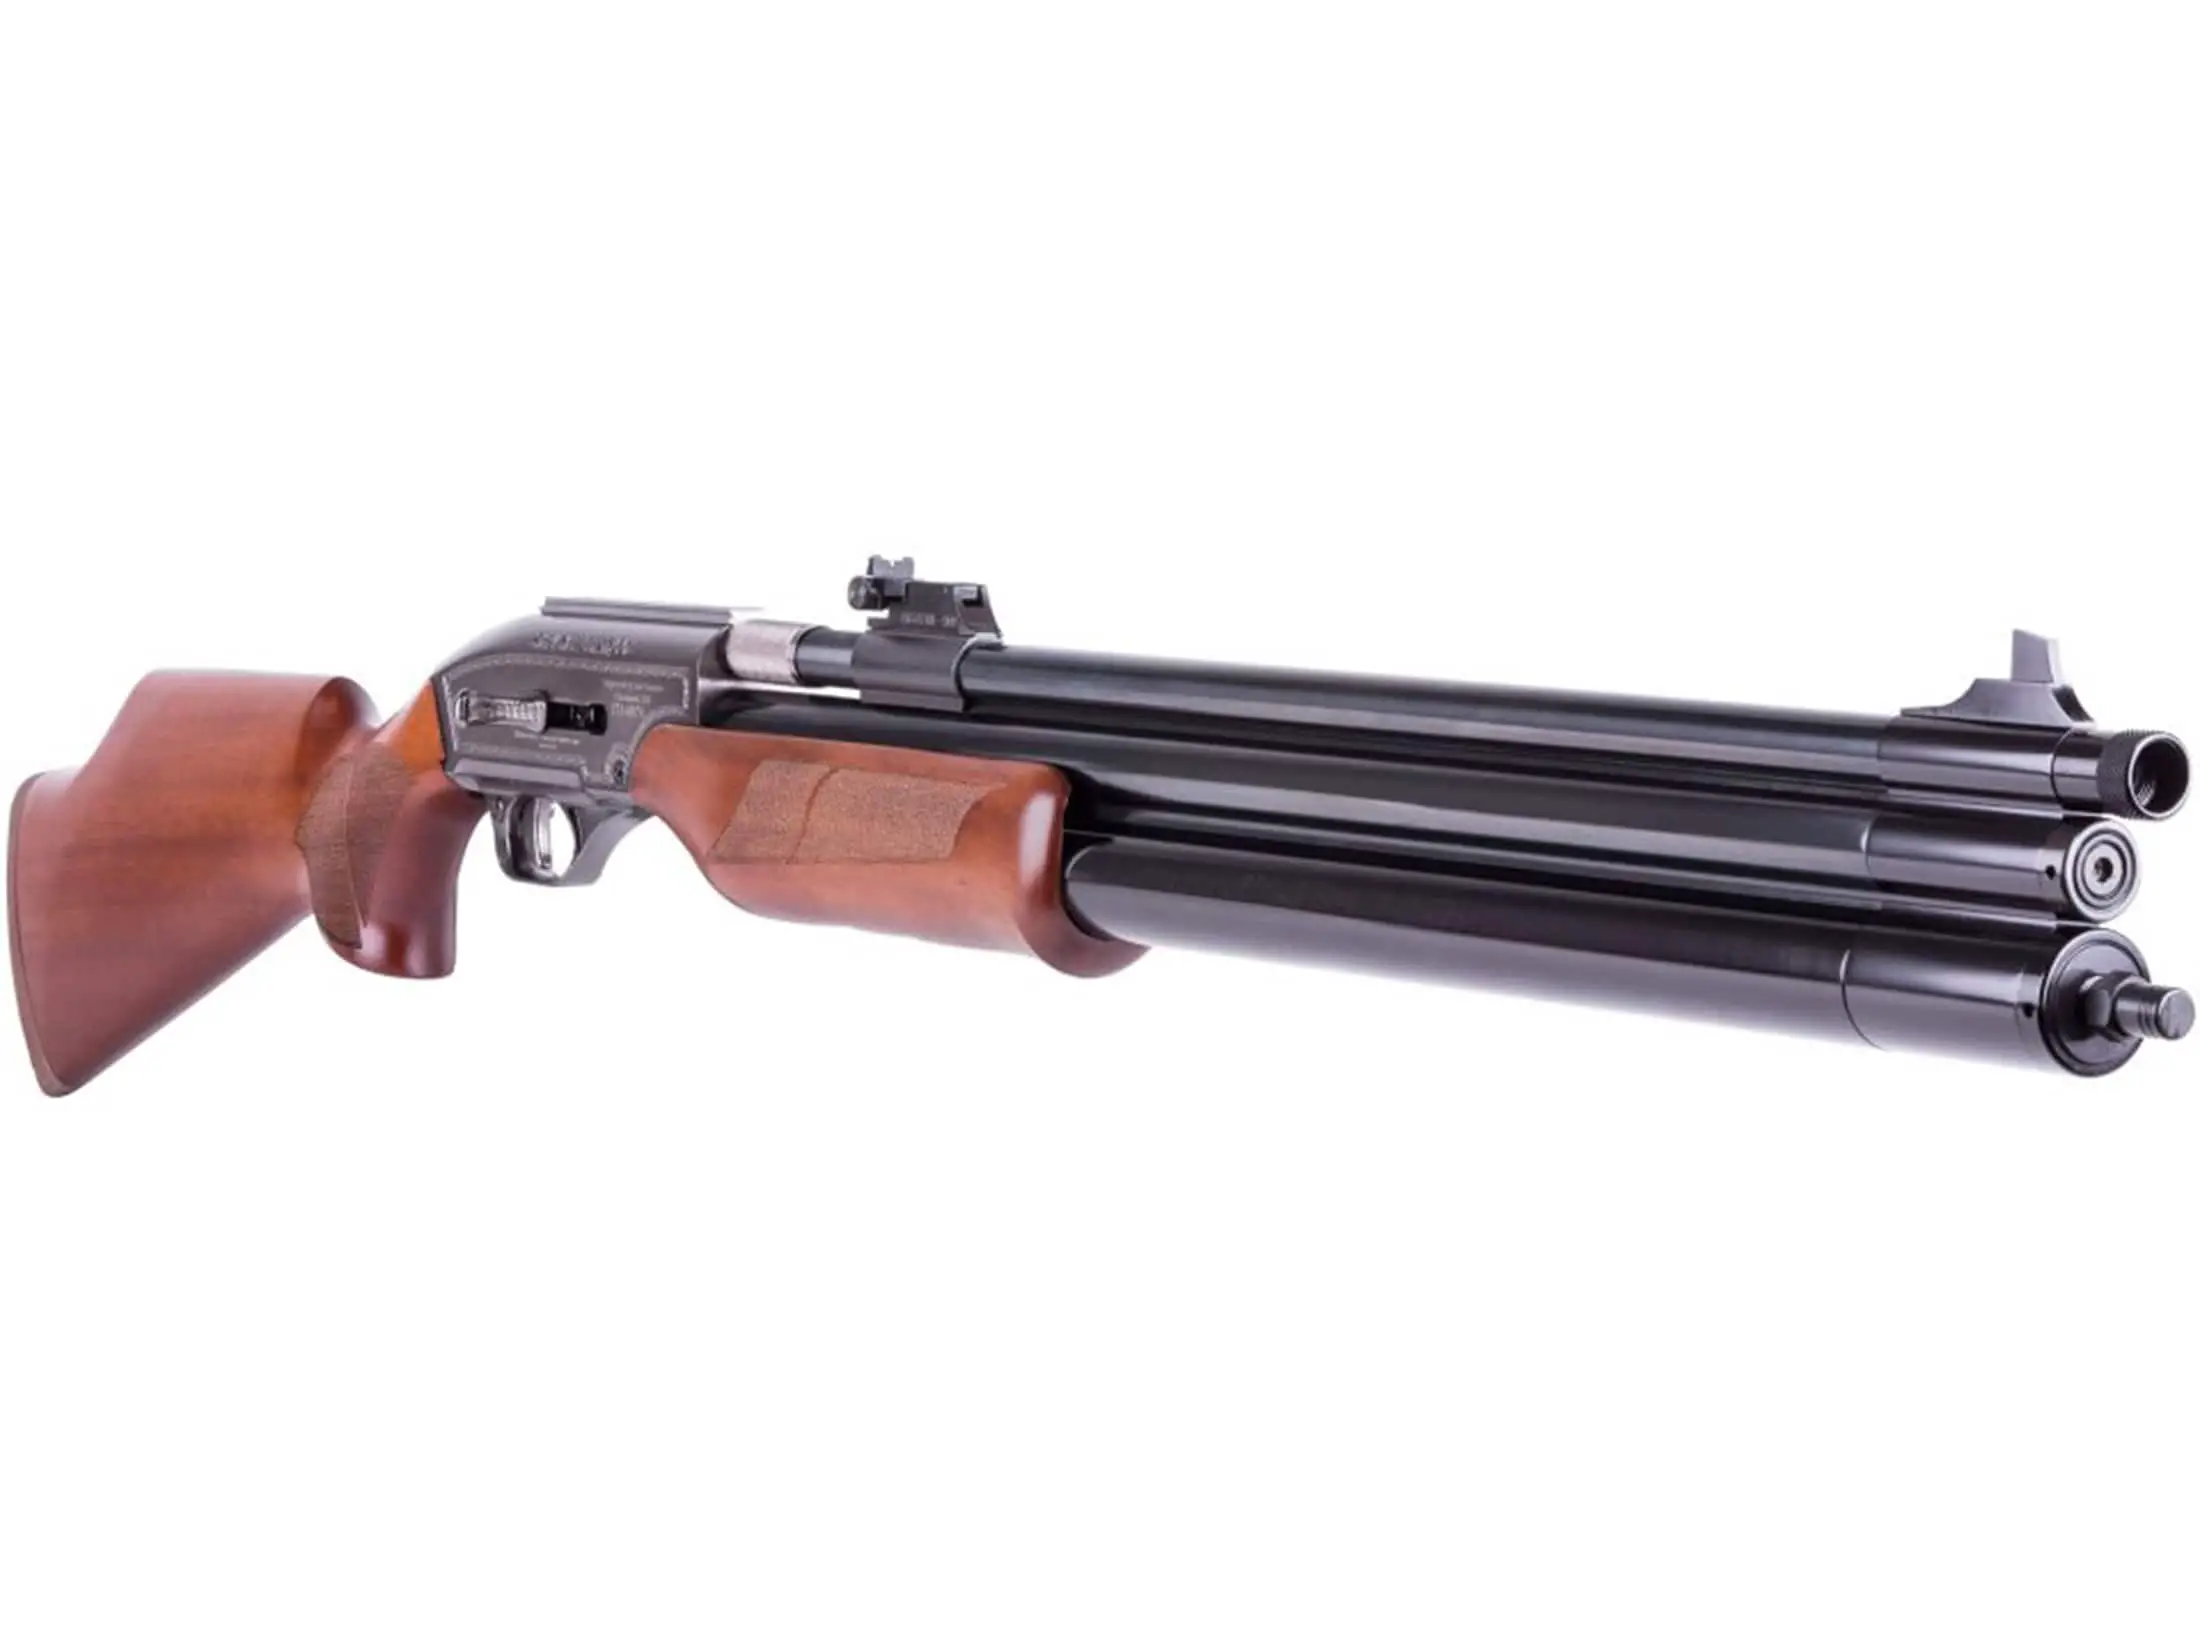 claw1 Best PCP air rifles - 15 of the best PCP guns you can buy right now (Reviews and Buying Guide 2022)